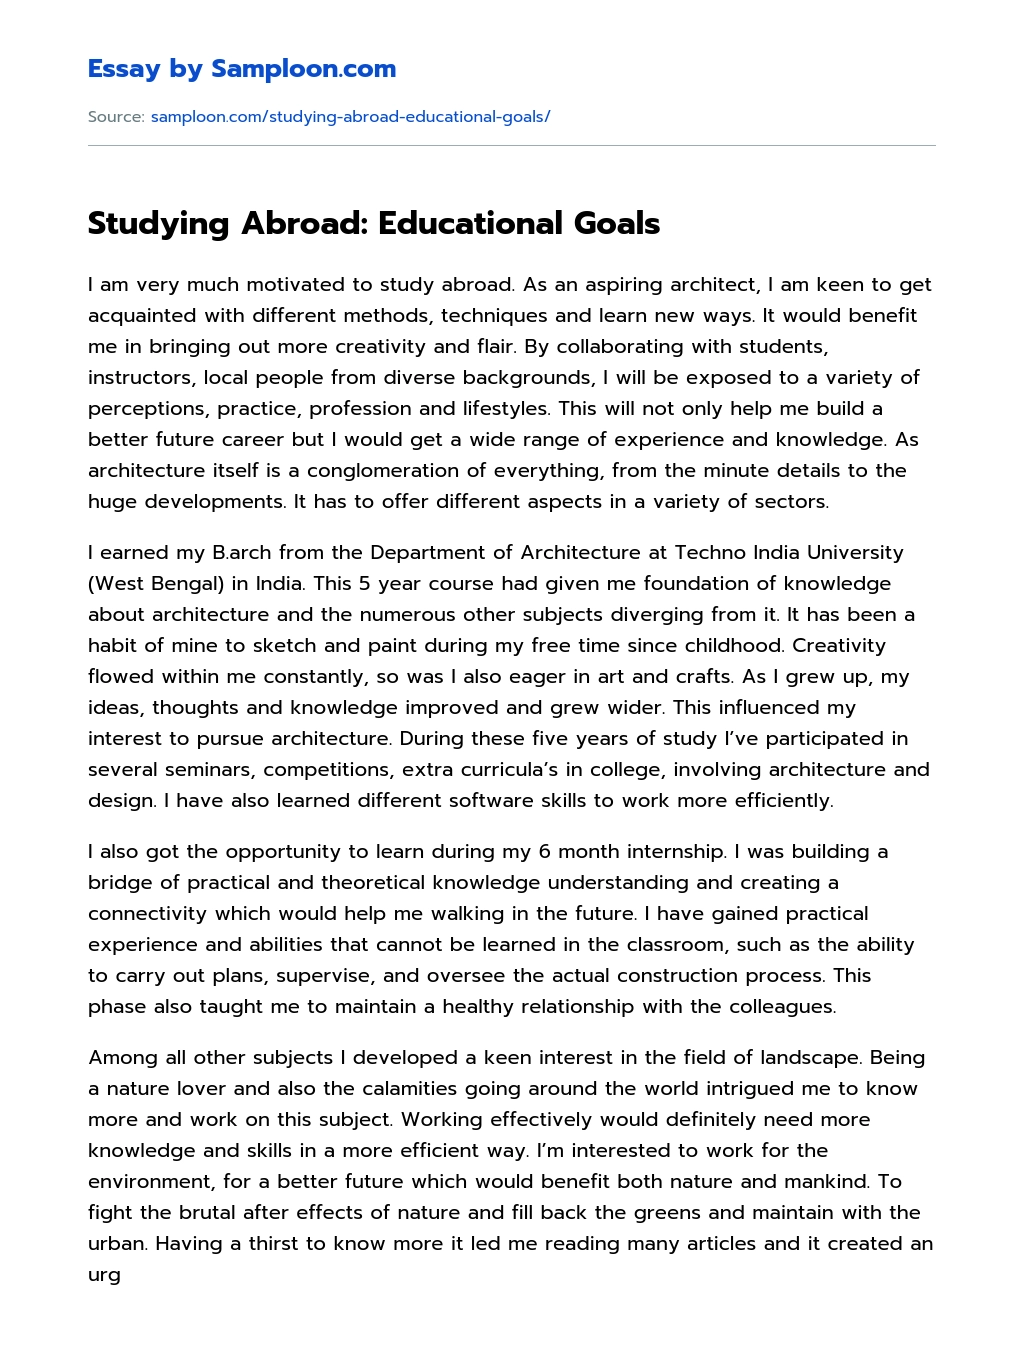 Studying Abroad: Educational Goals essay